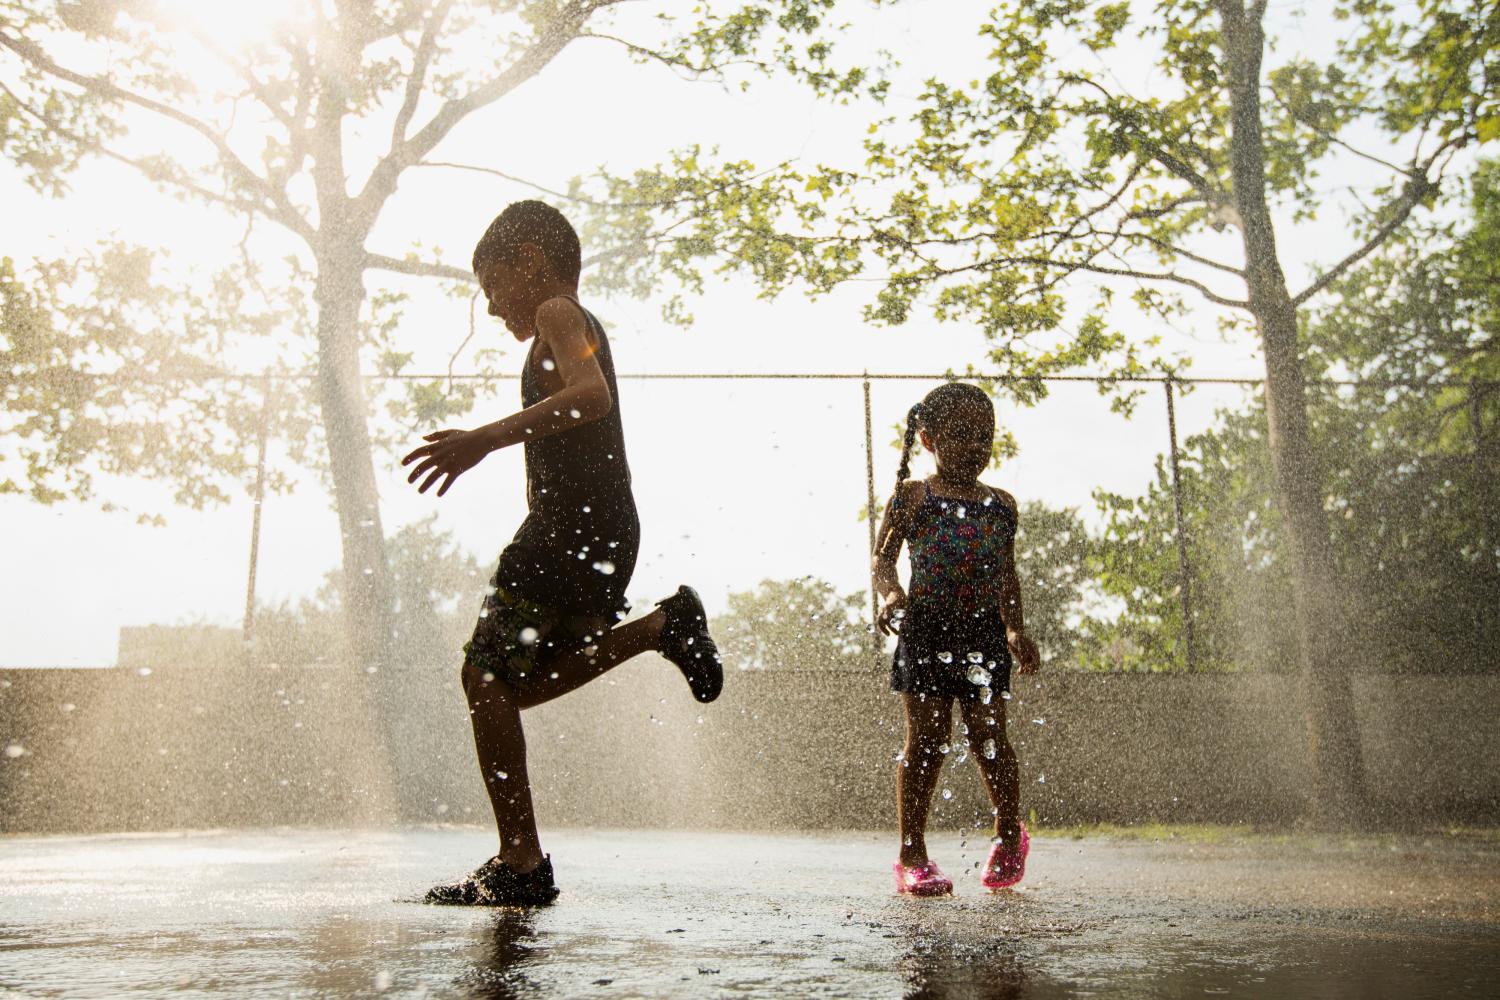 Children run through a sprinkler system installed inside a playground to cool off during a hot summer day in New York, July 17, 2013. Temperatures in New York City, the nation's biggest metropolitan area, soared into the upper 90s Fahrenheit for a third straight day on Wednesday and the National Weather Service issued heat advisories for dozens of northeastern cities and surrounding areas in Connecticut, Massachusetts, Rhode Island and upstate New York. REUTERS/Lucas Jackson (UNITED STATES - Tags: ENVIRONMENT) - GM1E97I0INZ01